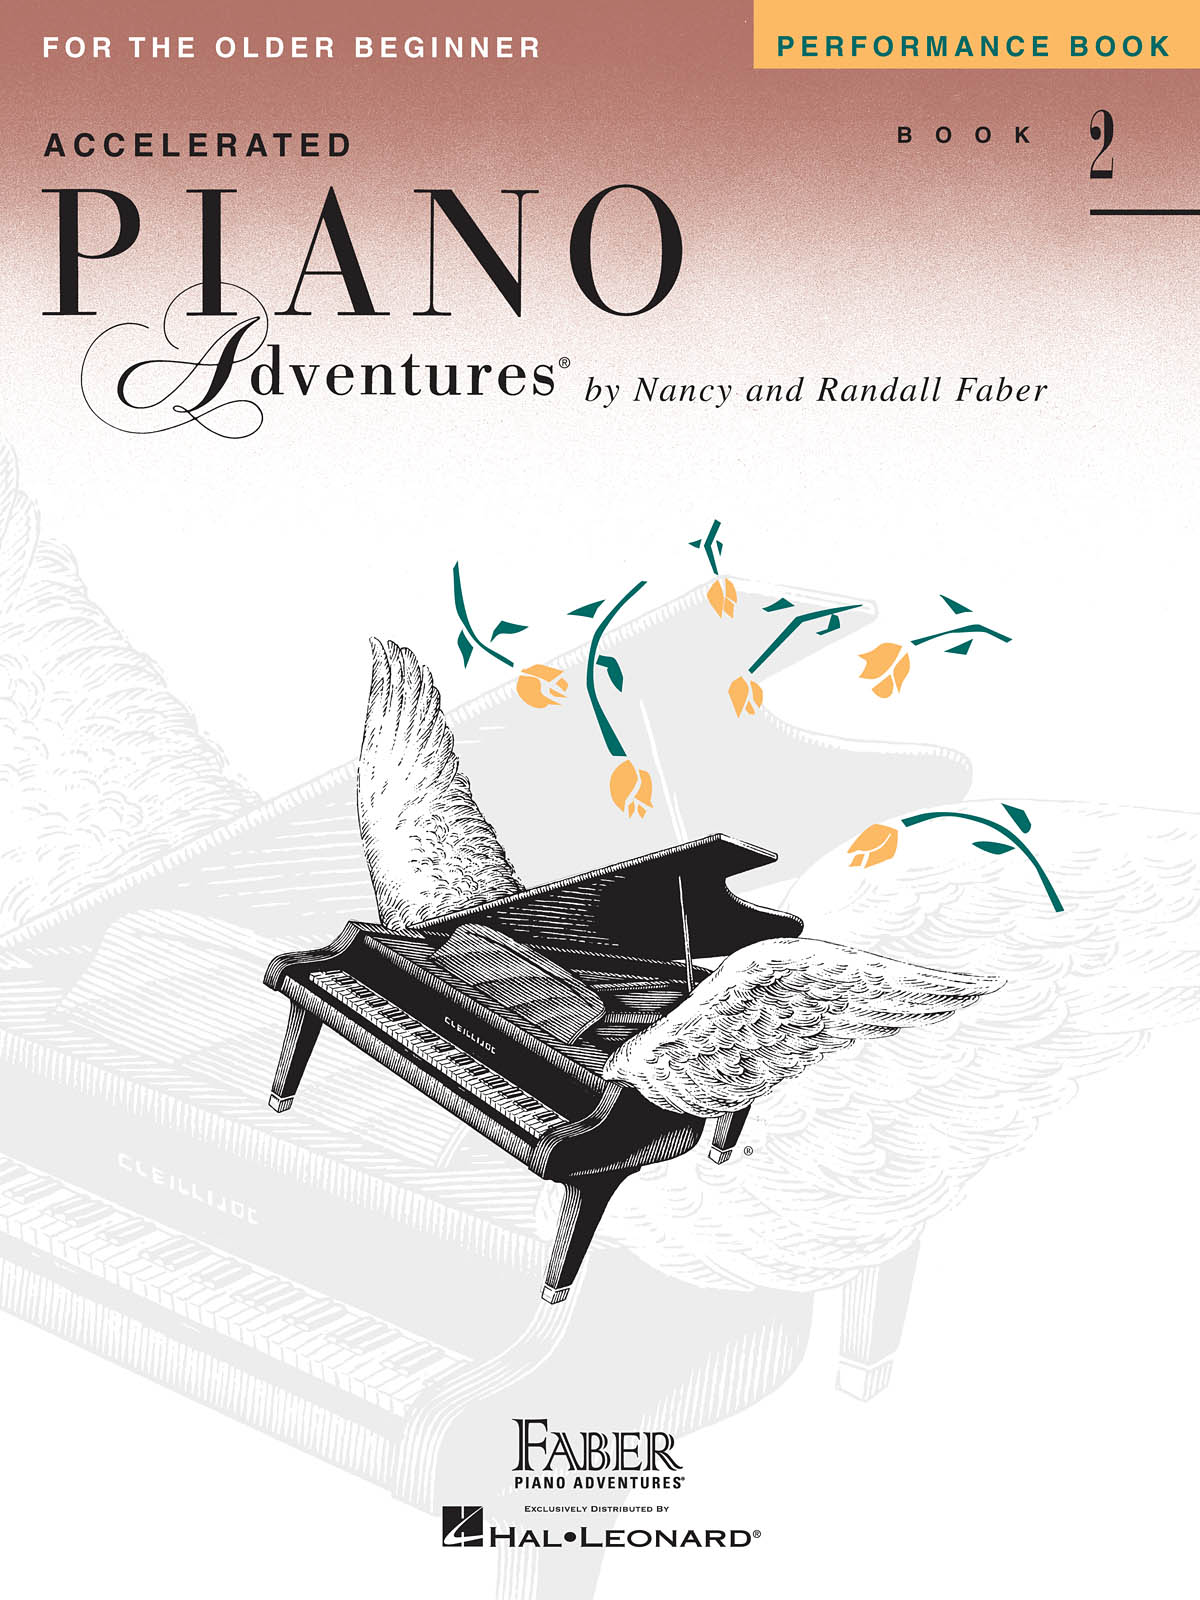 Accelerated Piano Adventures Performance Book 2 For The Older Beginner